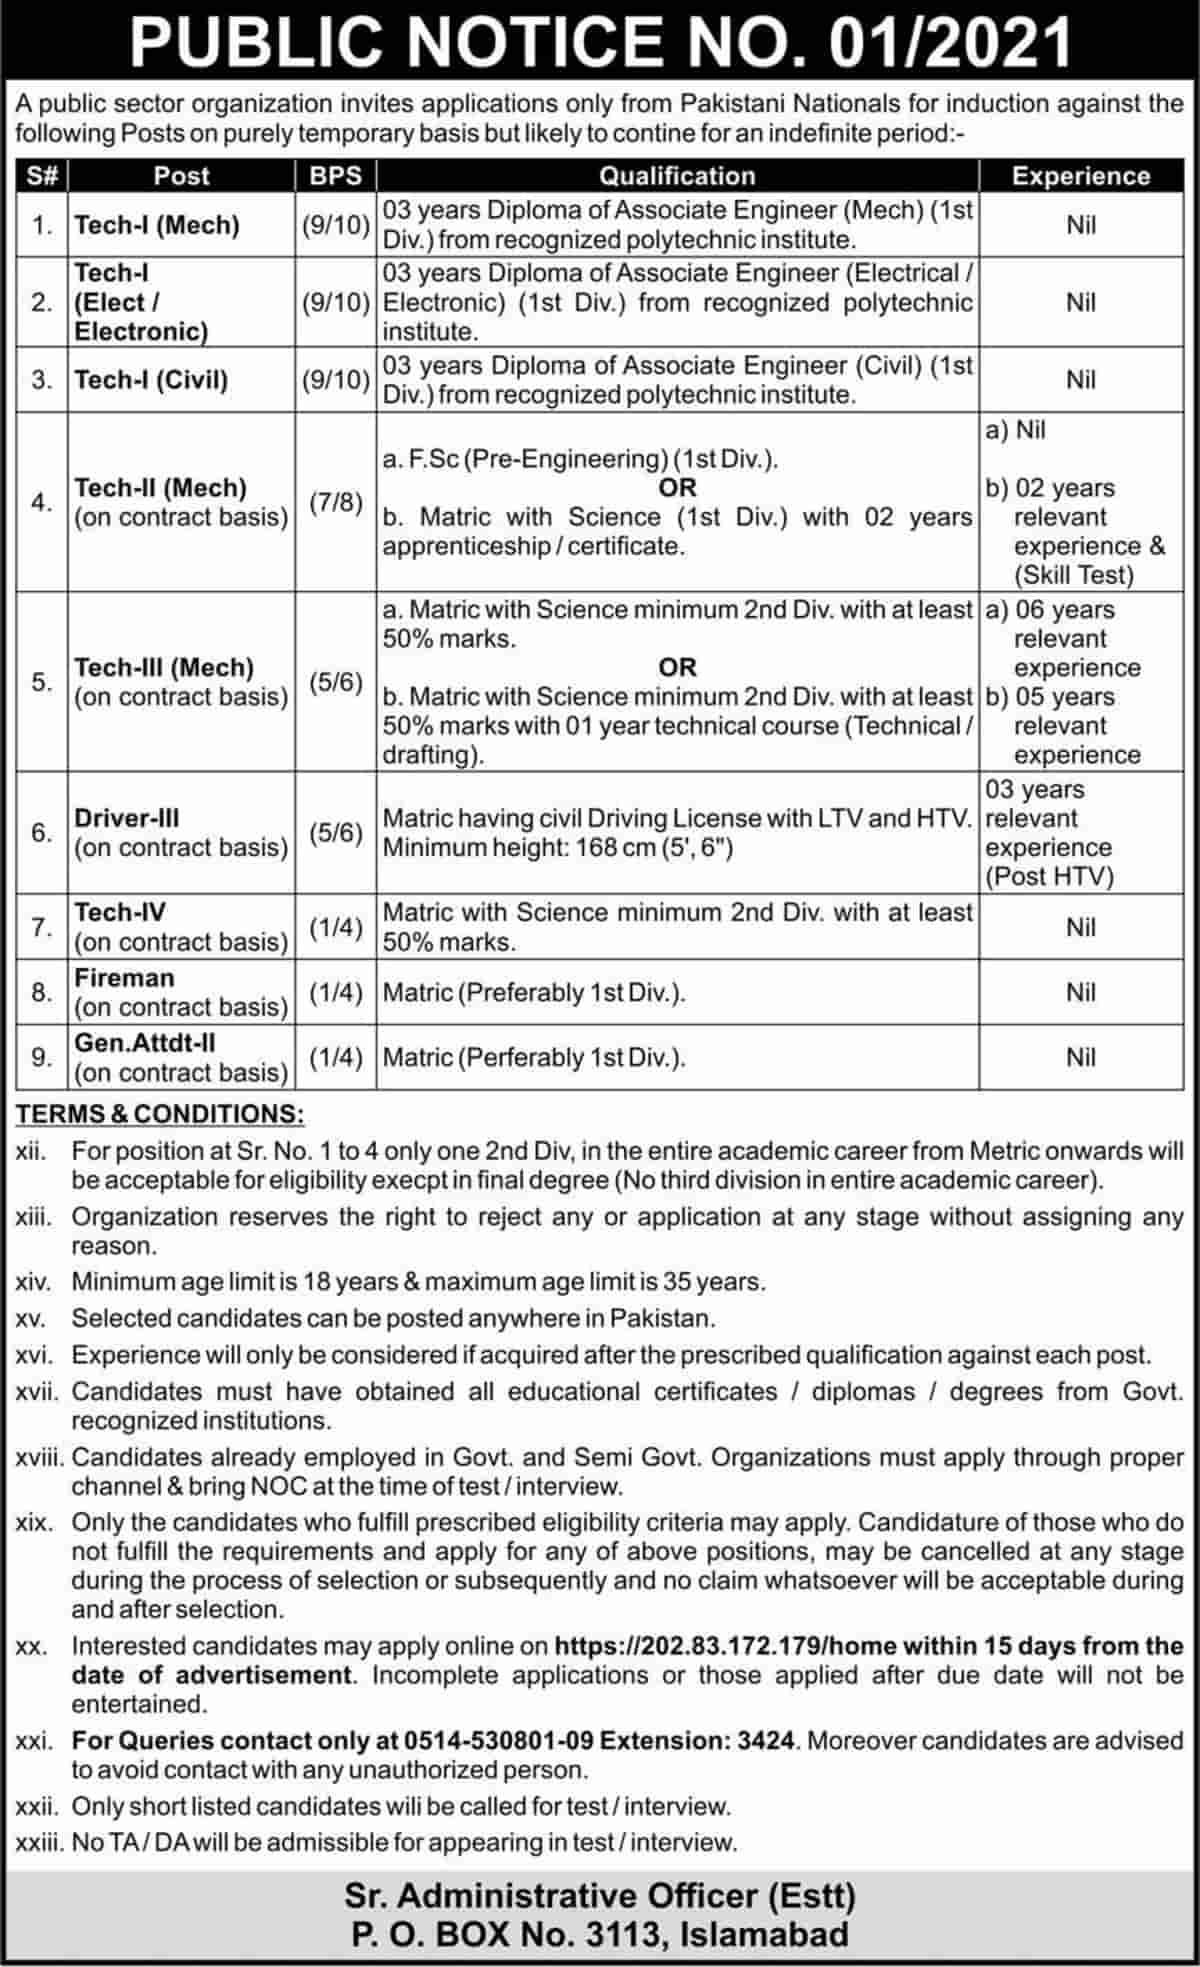 Atomic Energy Commission PAEC Jobs 2021 https://202.83.172.179/home